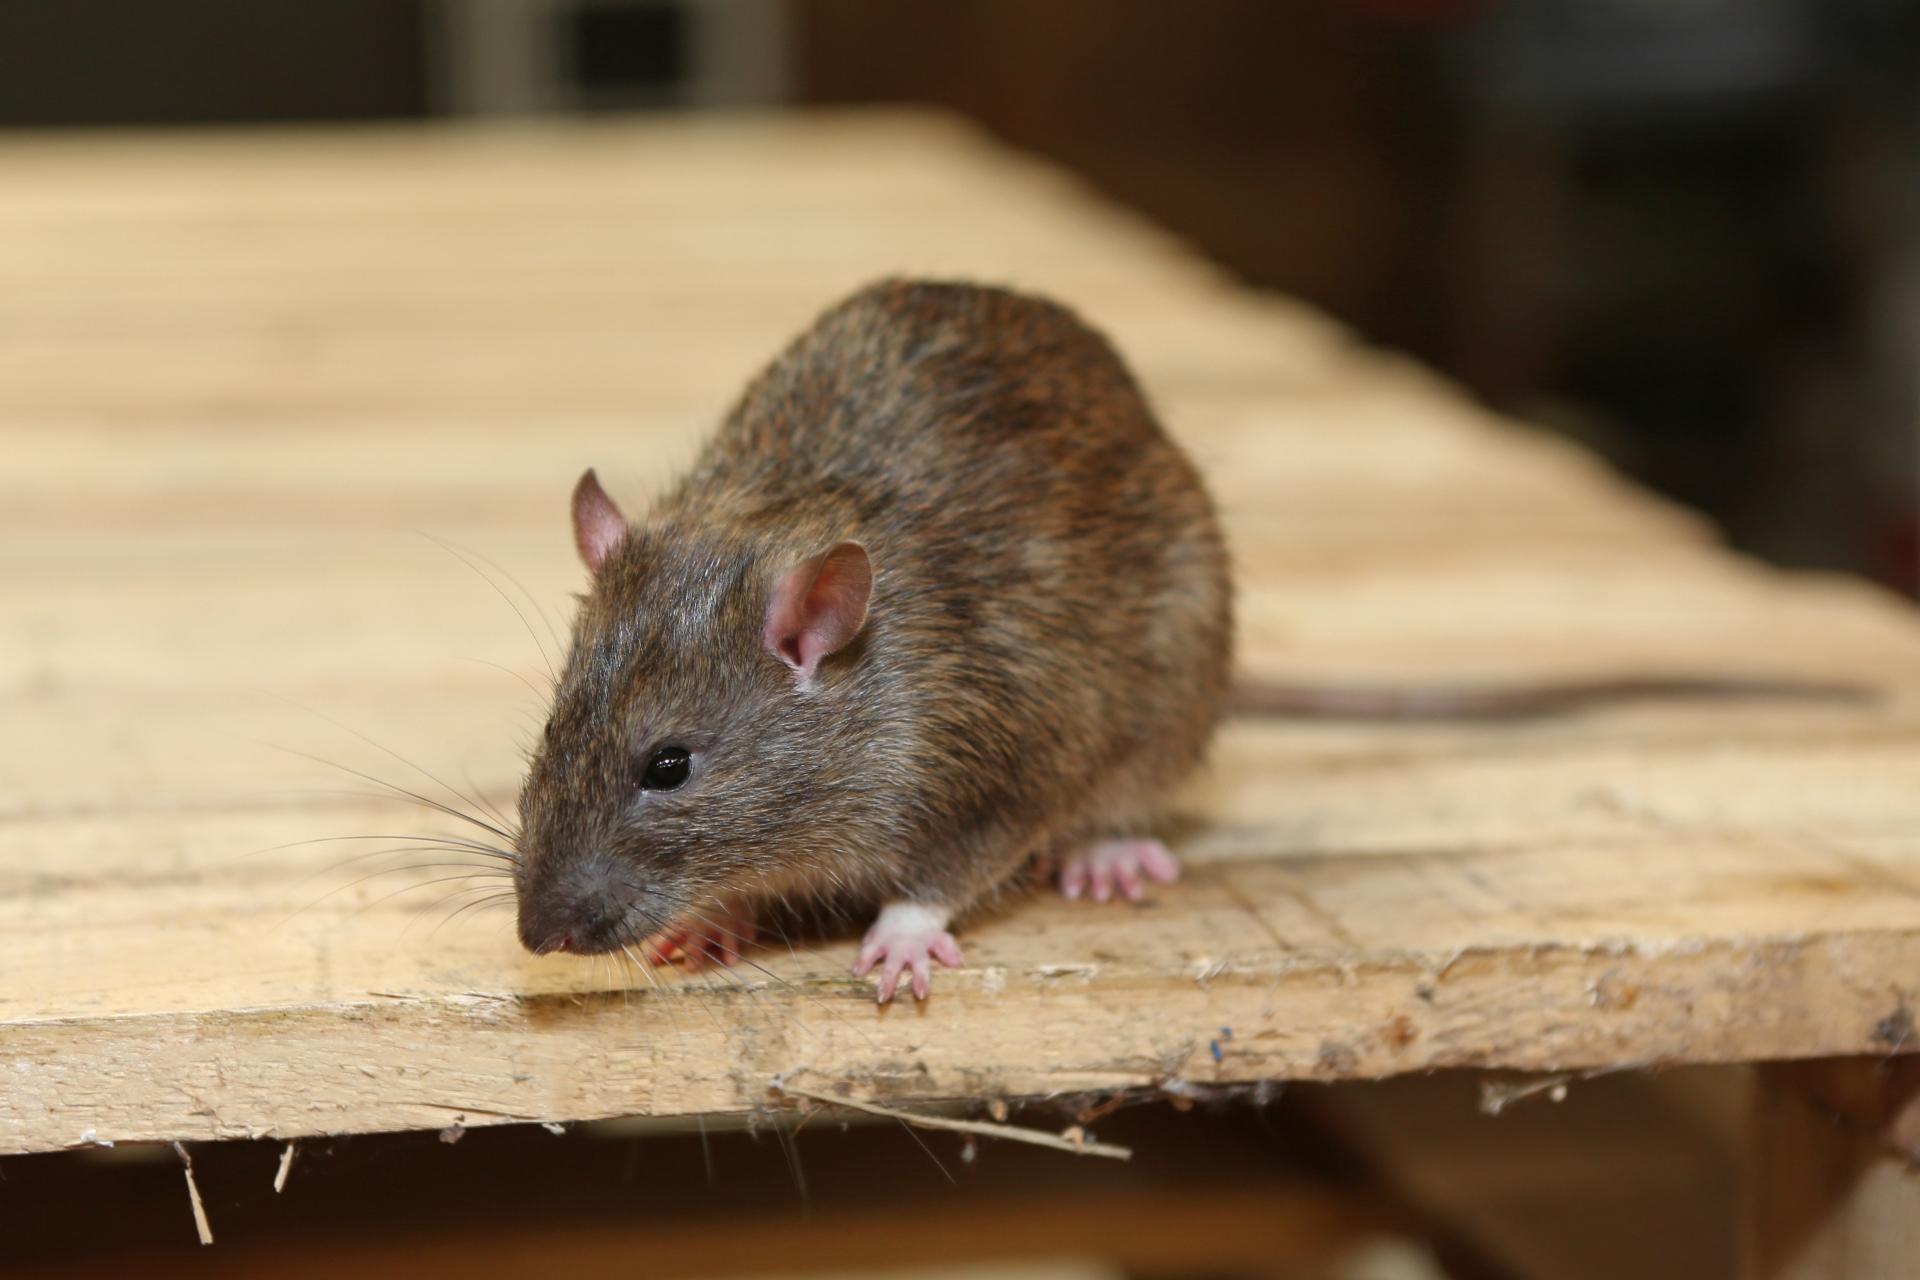 Rat Control, Pest Control in Strawberry Hill, Whitton, TW2. Call Now 020 8166 9746